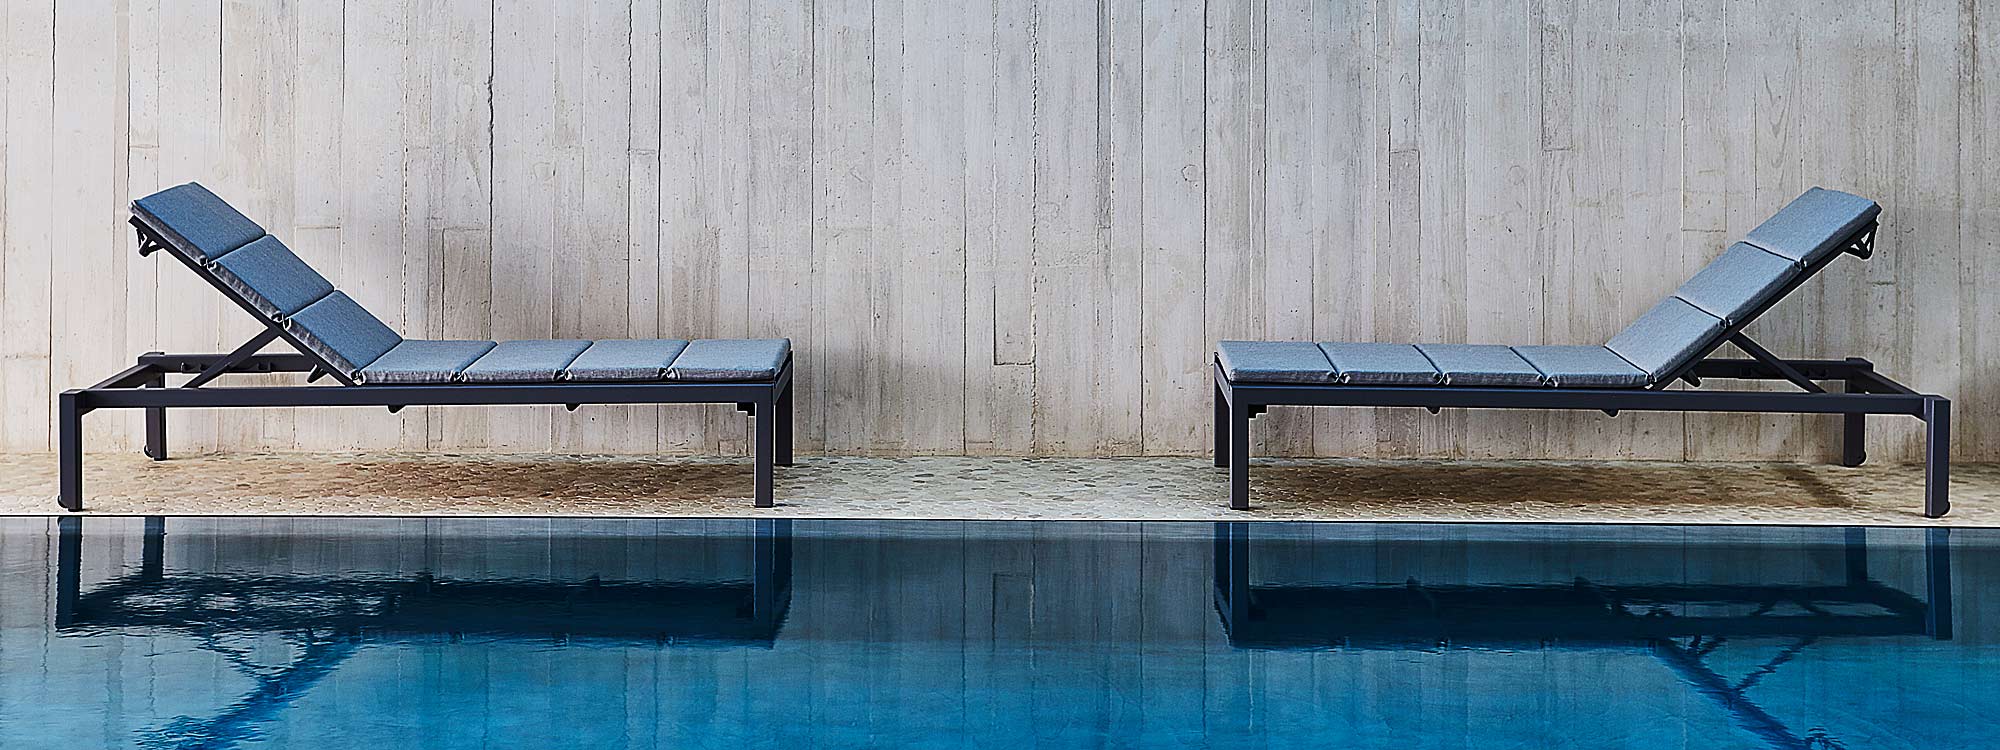 Image of pair of Cane-line Relax modern sun beds on poolside in front of poured concrete wall